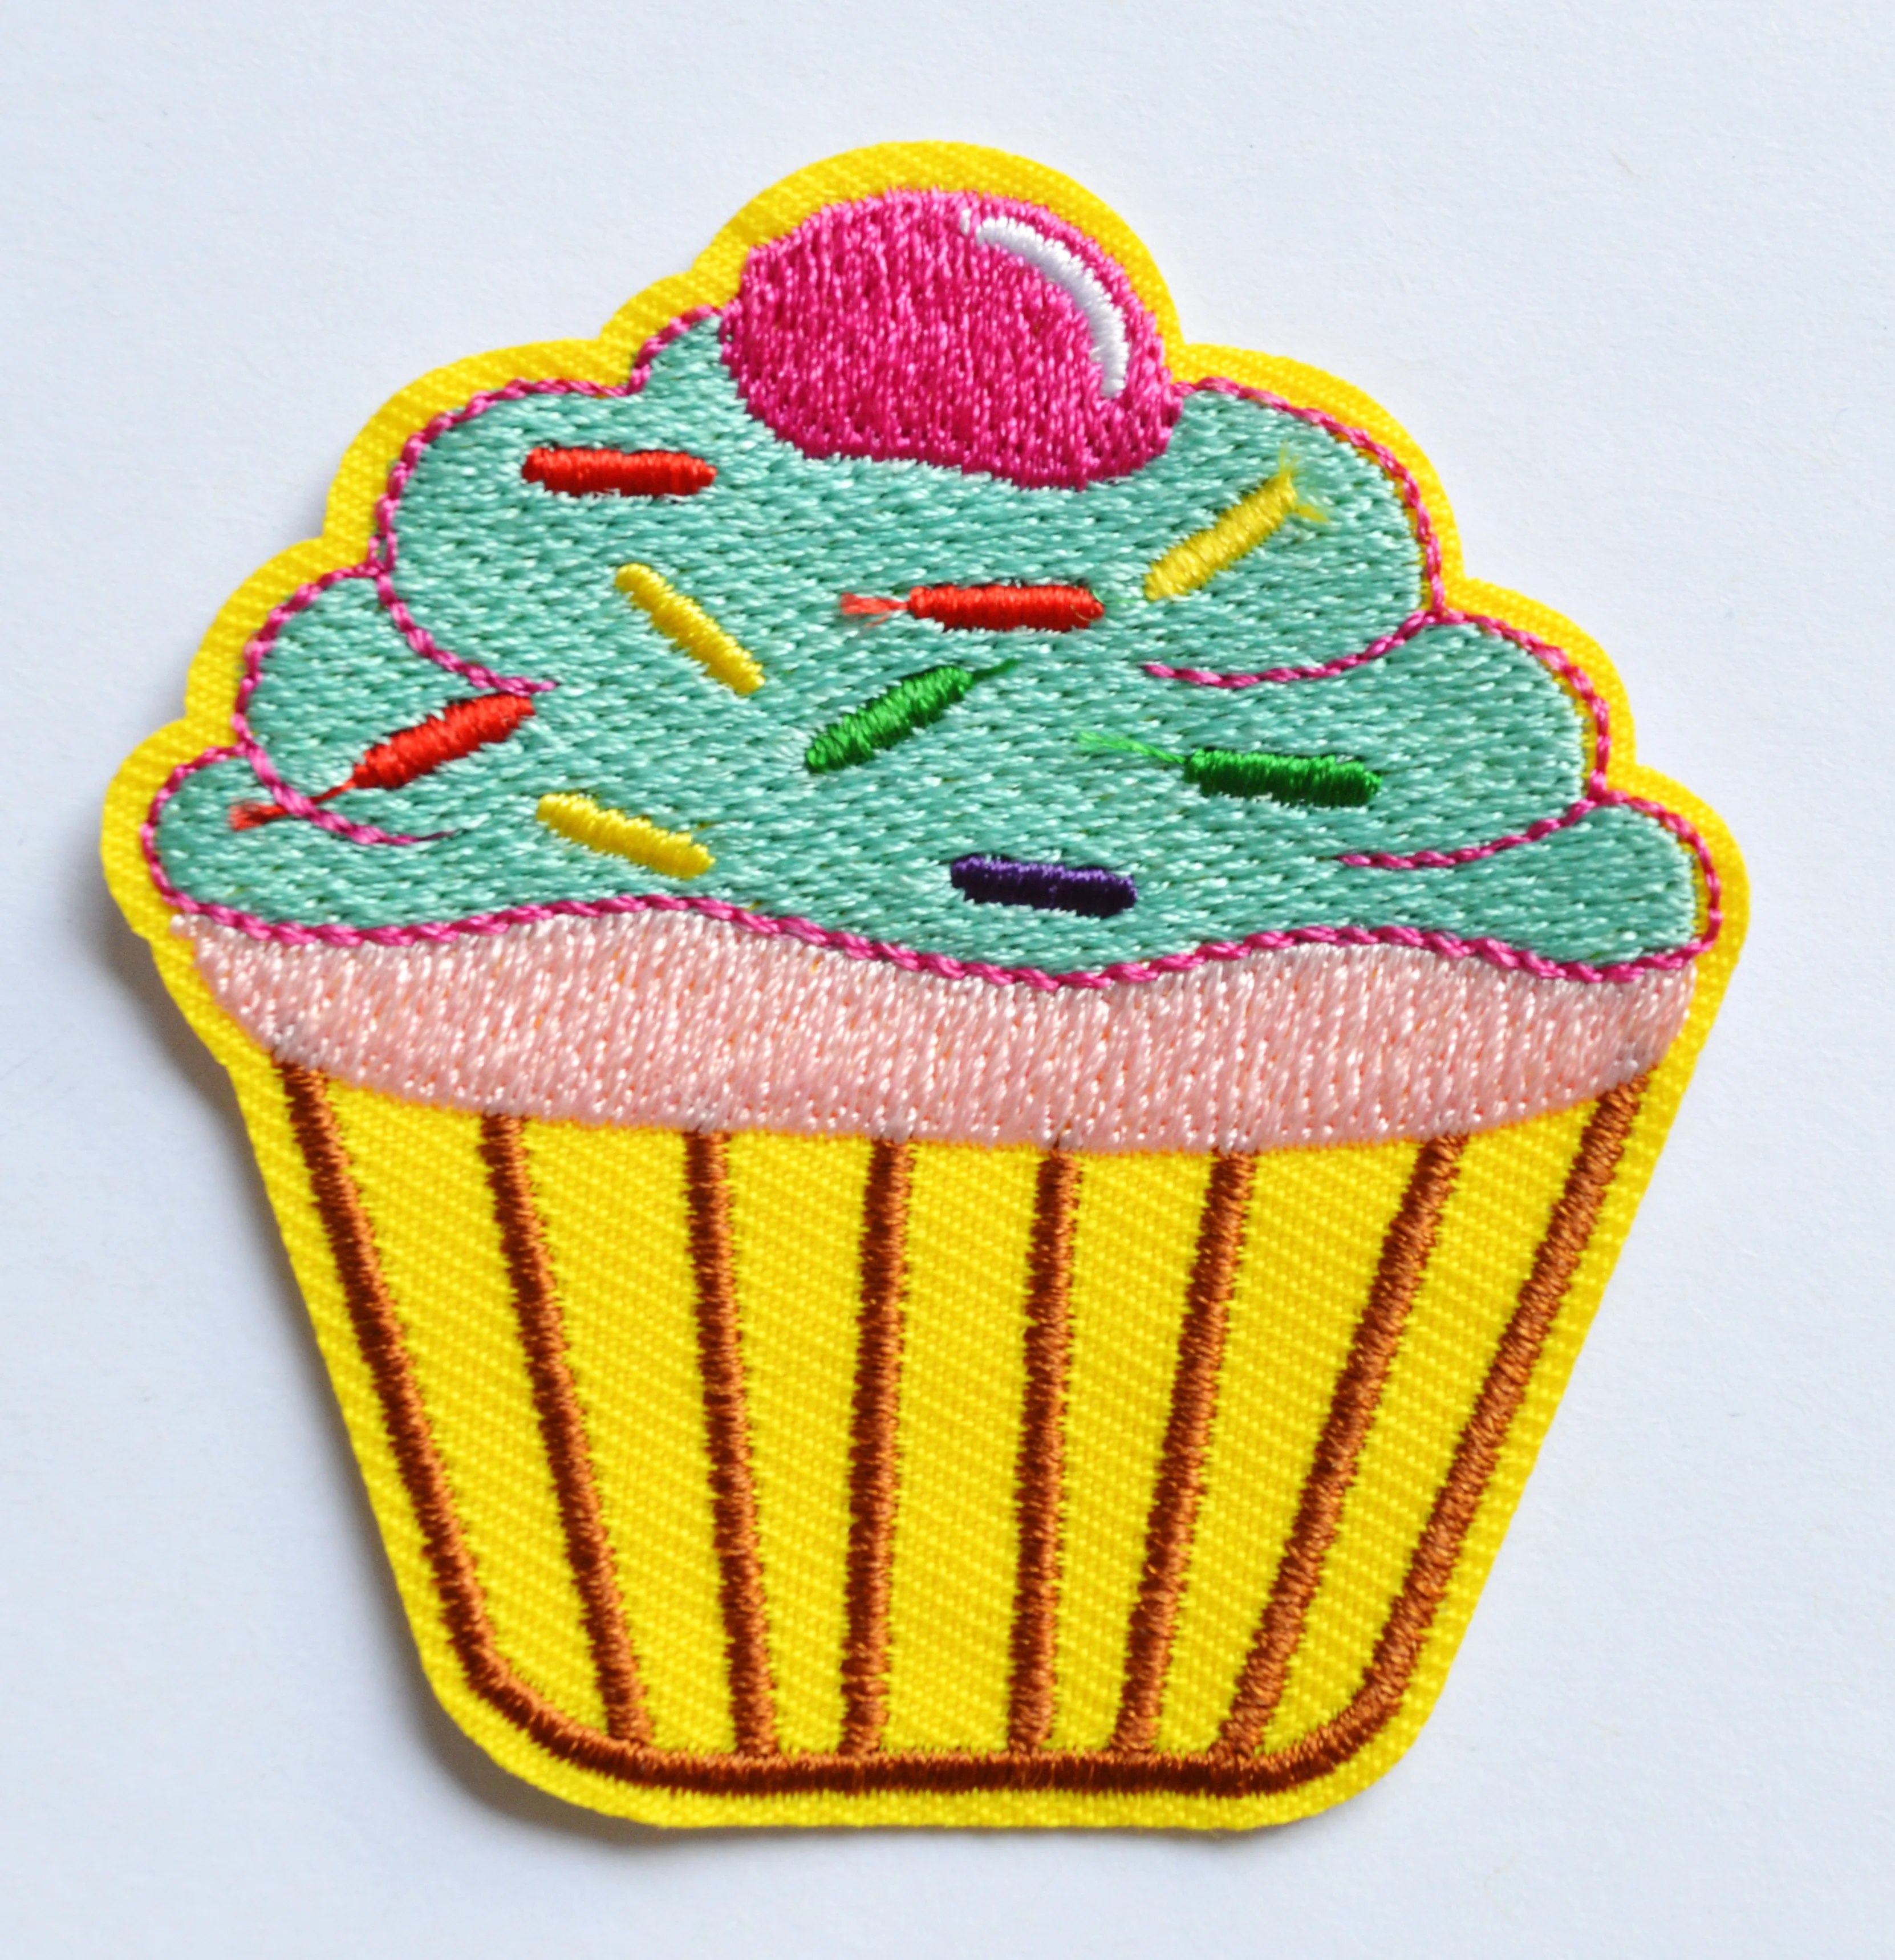 

100x Cupcake retro snack cake sweets fun embroidered applique iron on patch (≈ 6.6 * 6.6 cm)